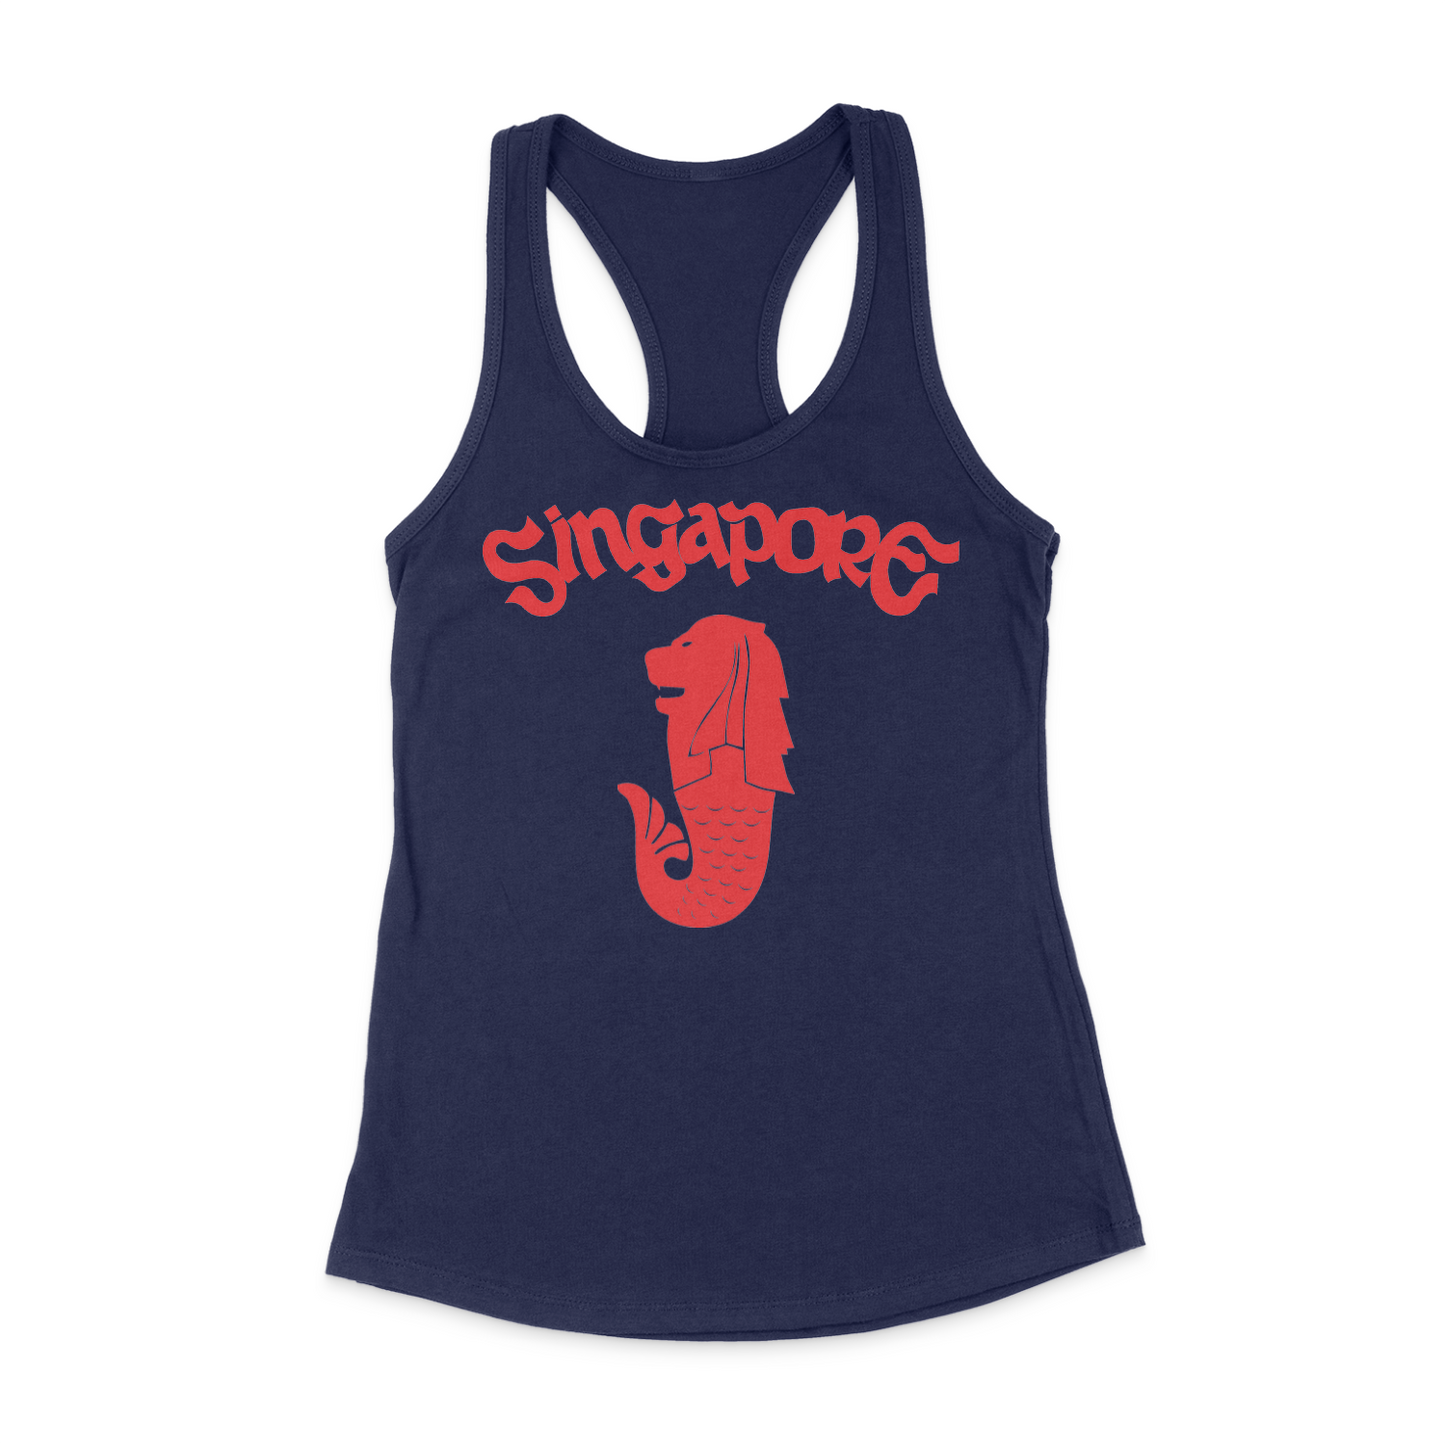 Orchard Road Tank Top